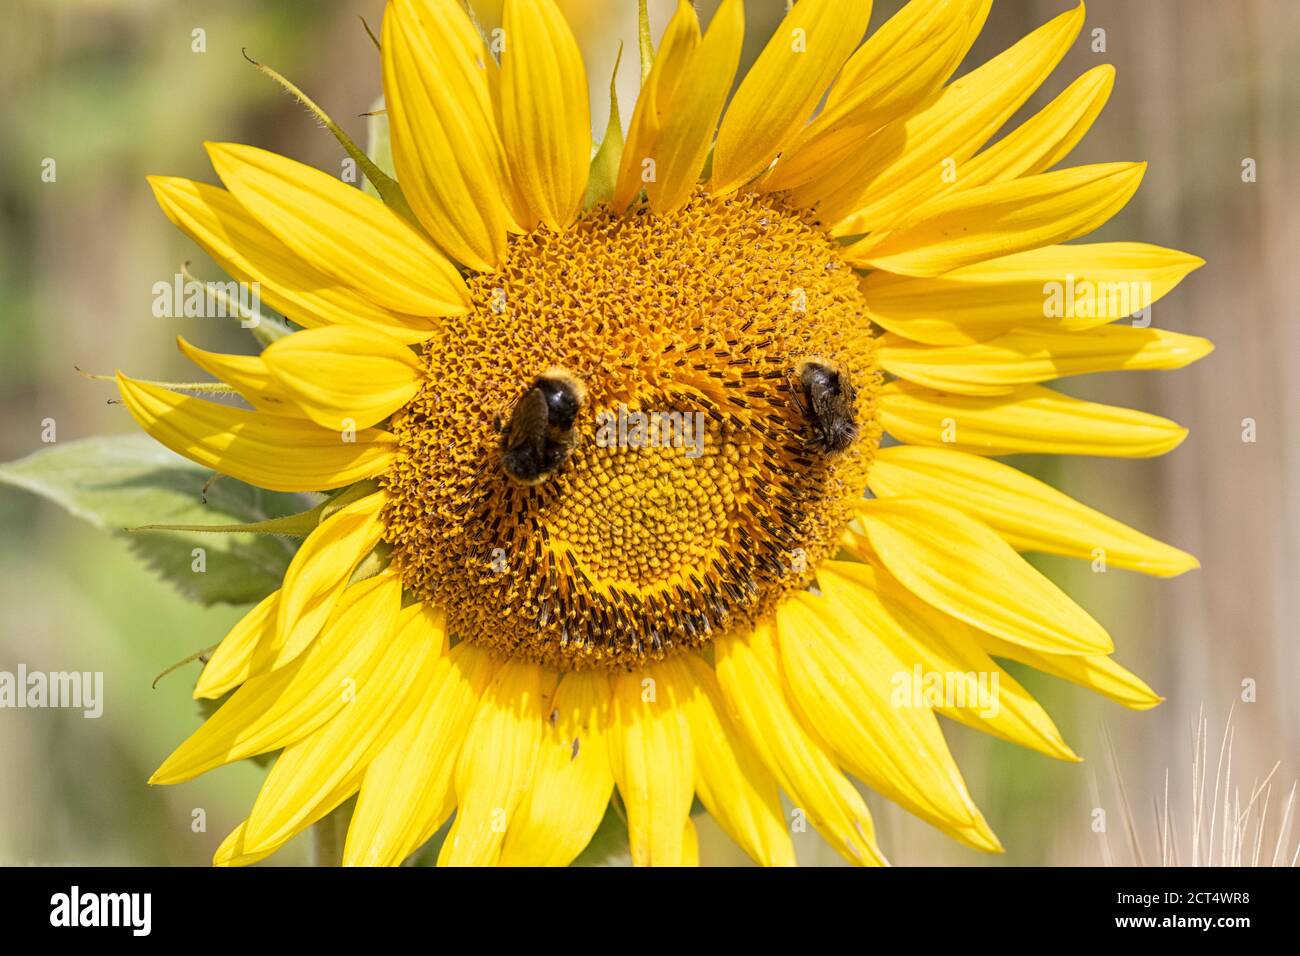 A smiling sunflower head in a cornfield, with bees for eyes. Stock Photo